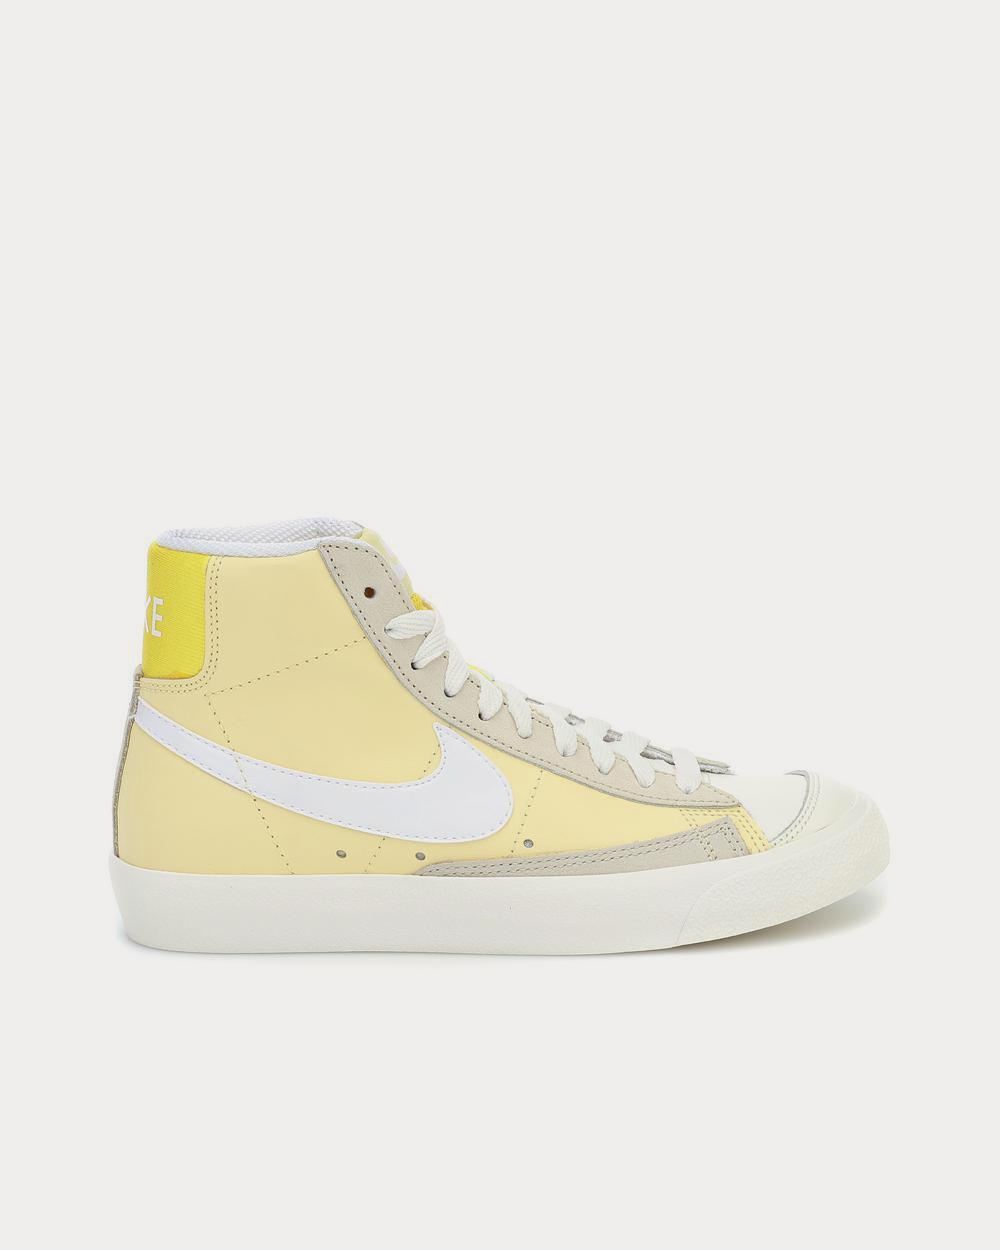 thermometer strak vreugde Nike Blazer Mid '77 leather Yellow High Top Sneakers - Sneak in Peace